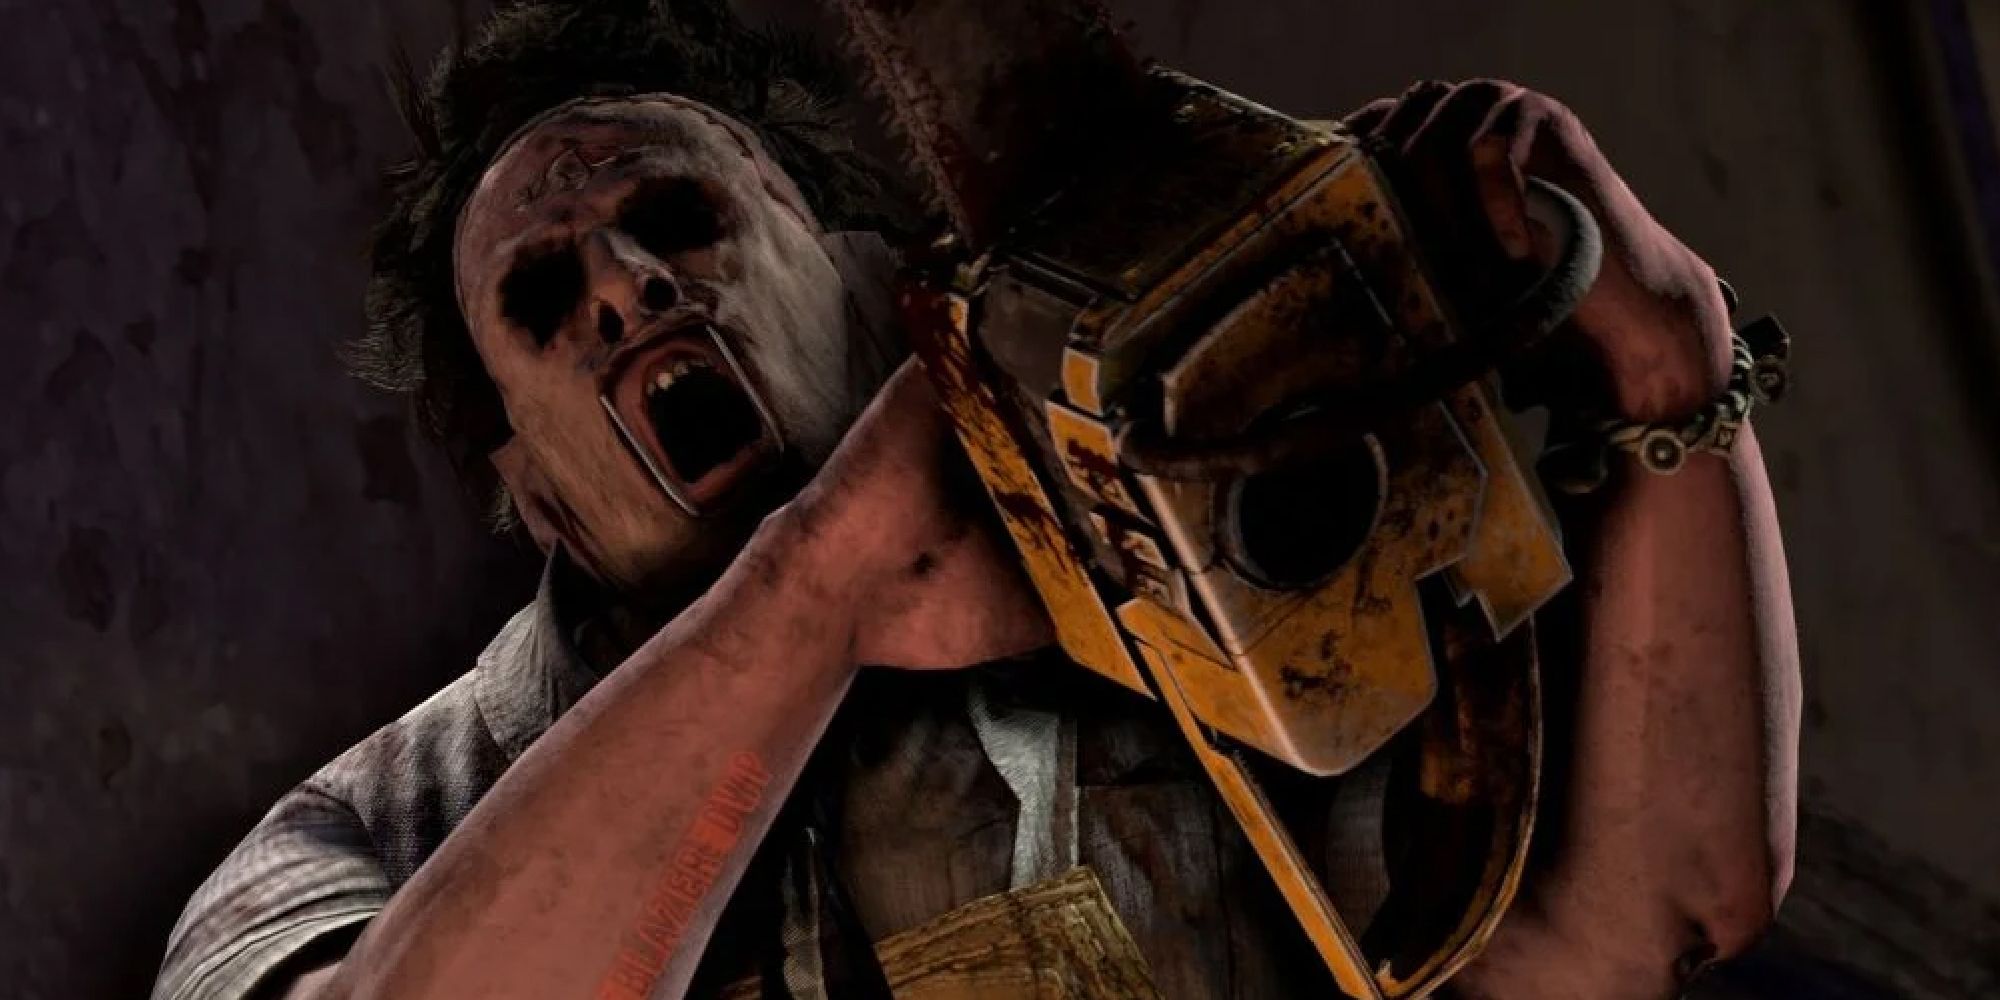 Dead by Daylight Leatherface waving a chainsaw toward the camera